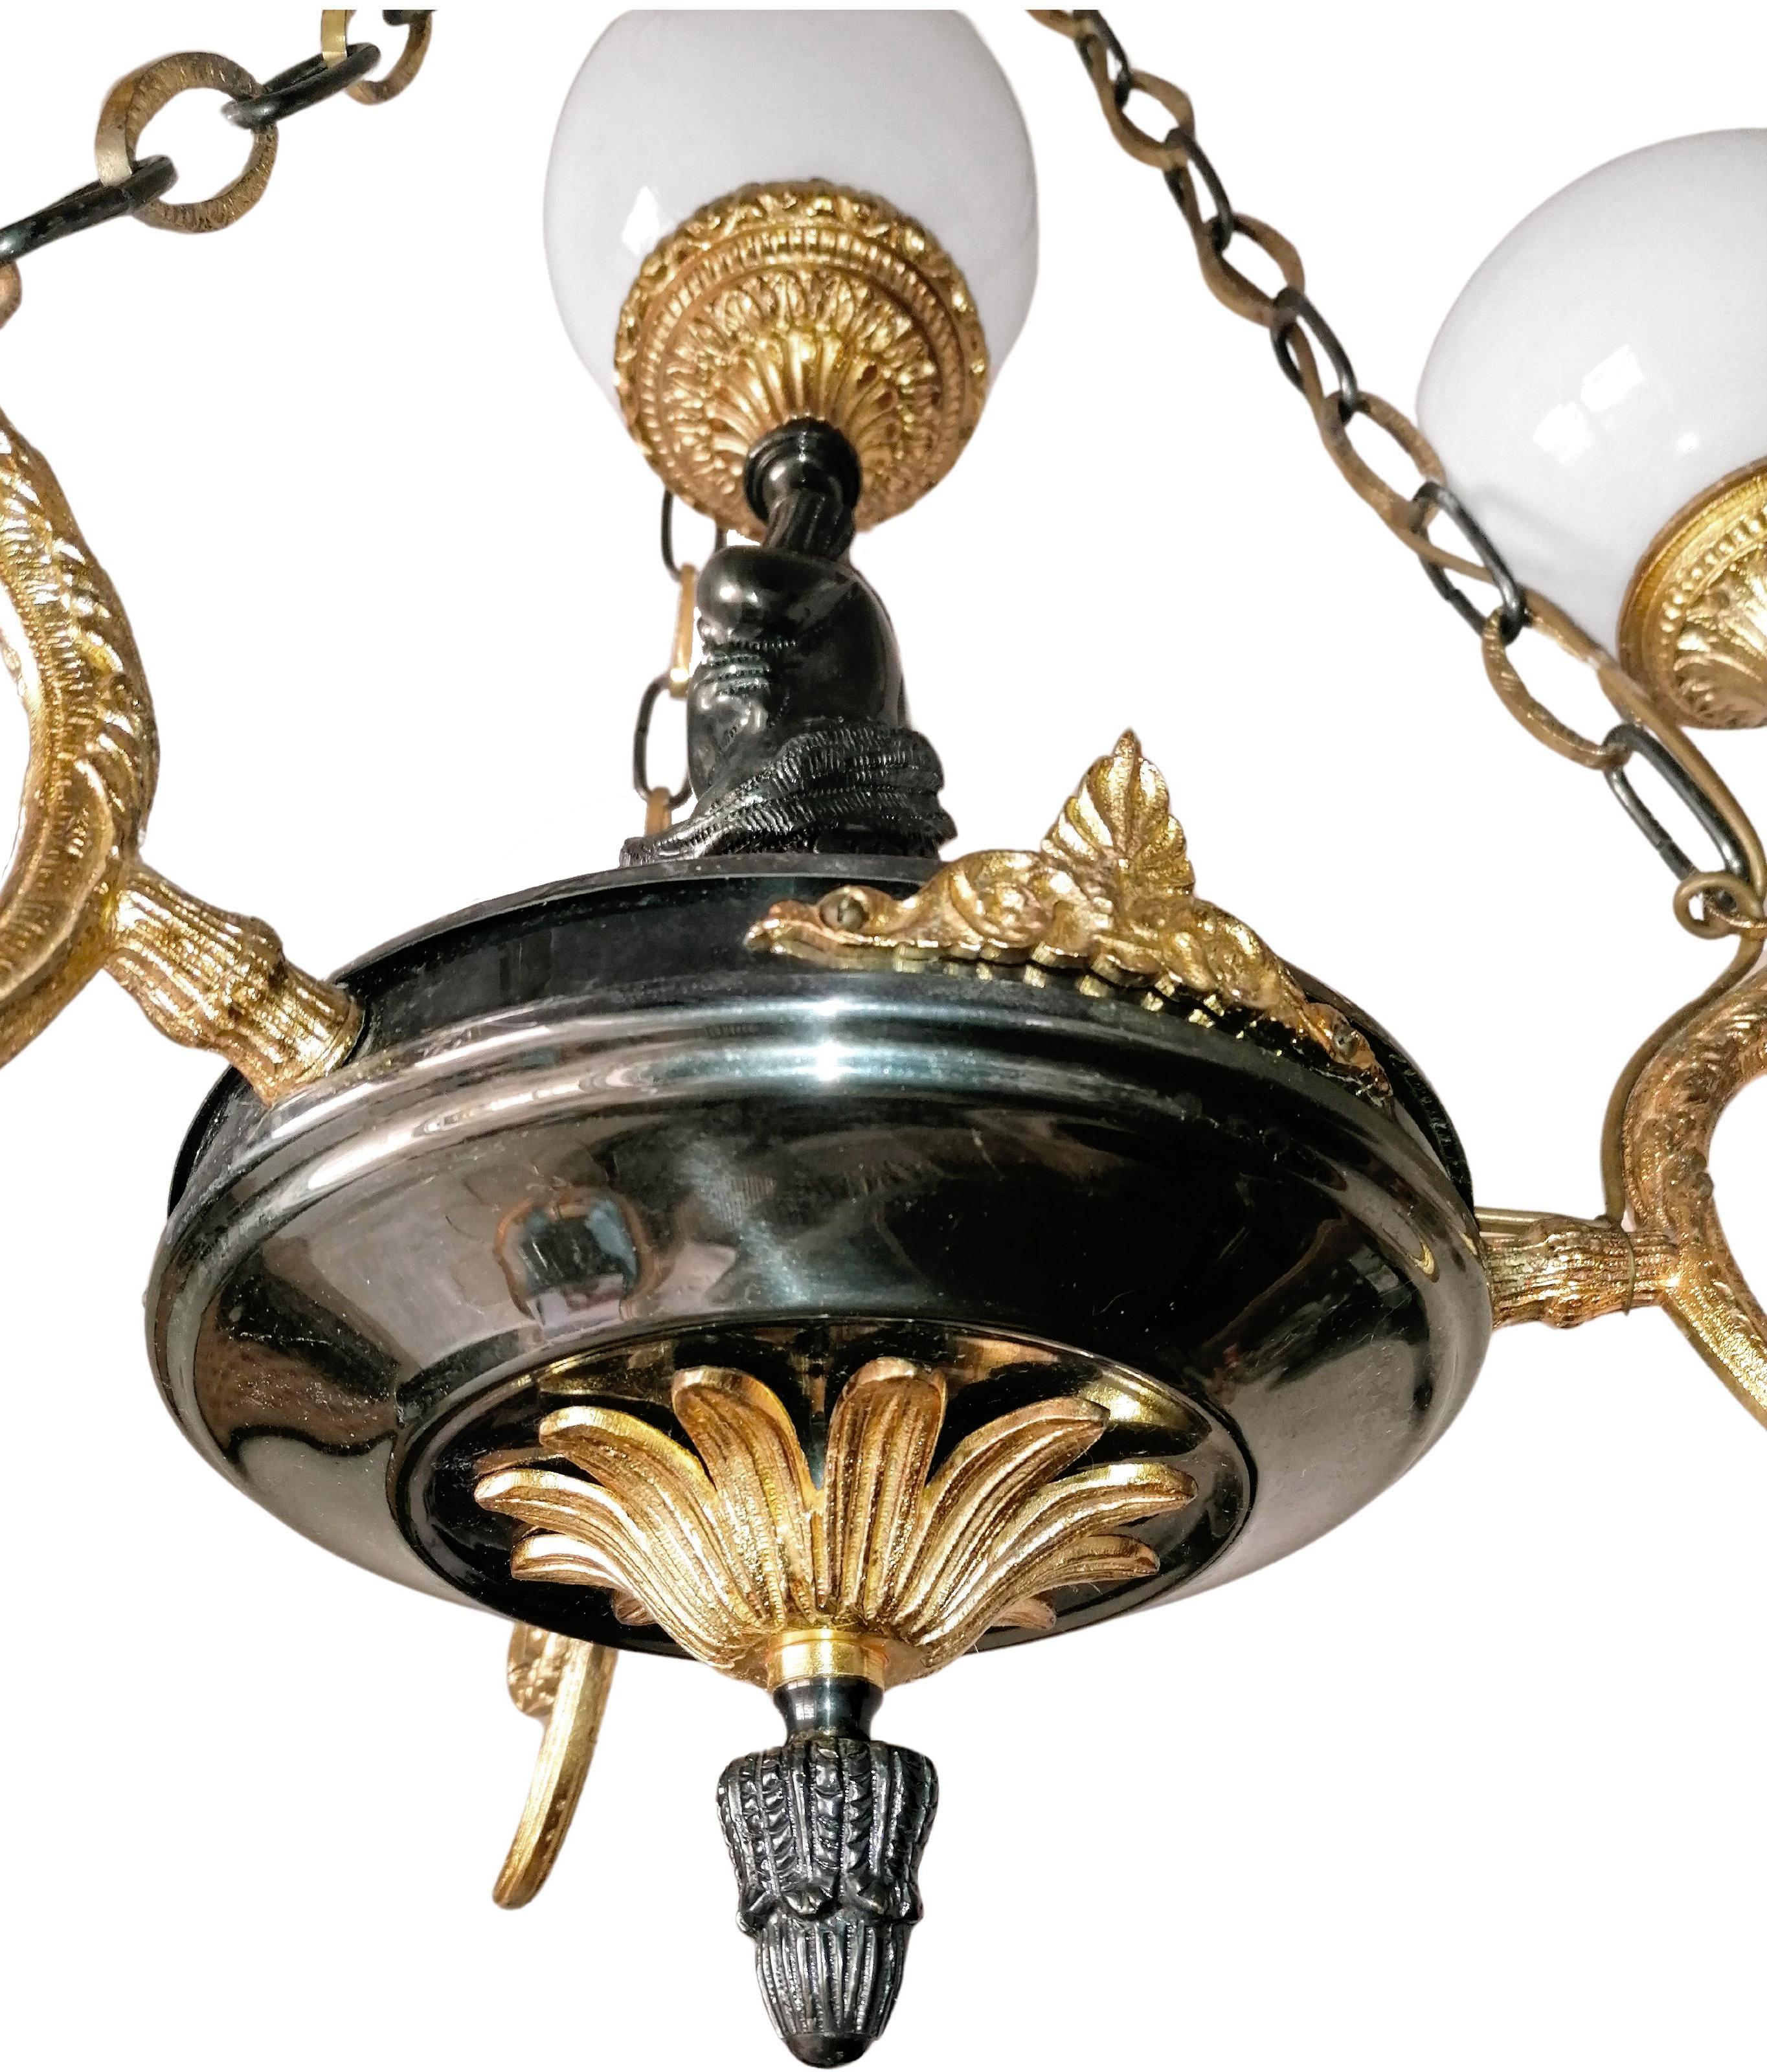 20th Century French Empire Neoclassical Cherub Putti Patinated & Gilt Solid Bronze Chandelier For Sale